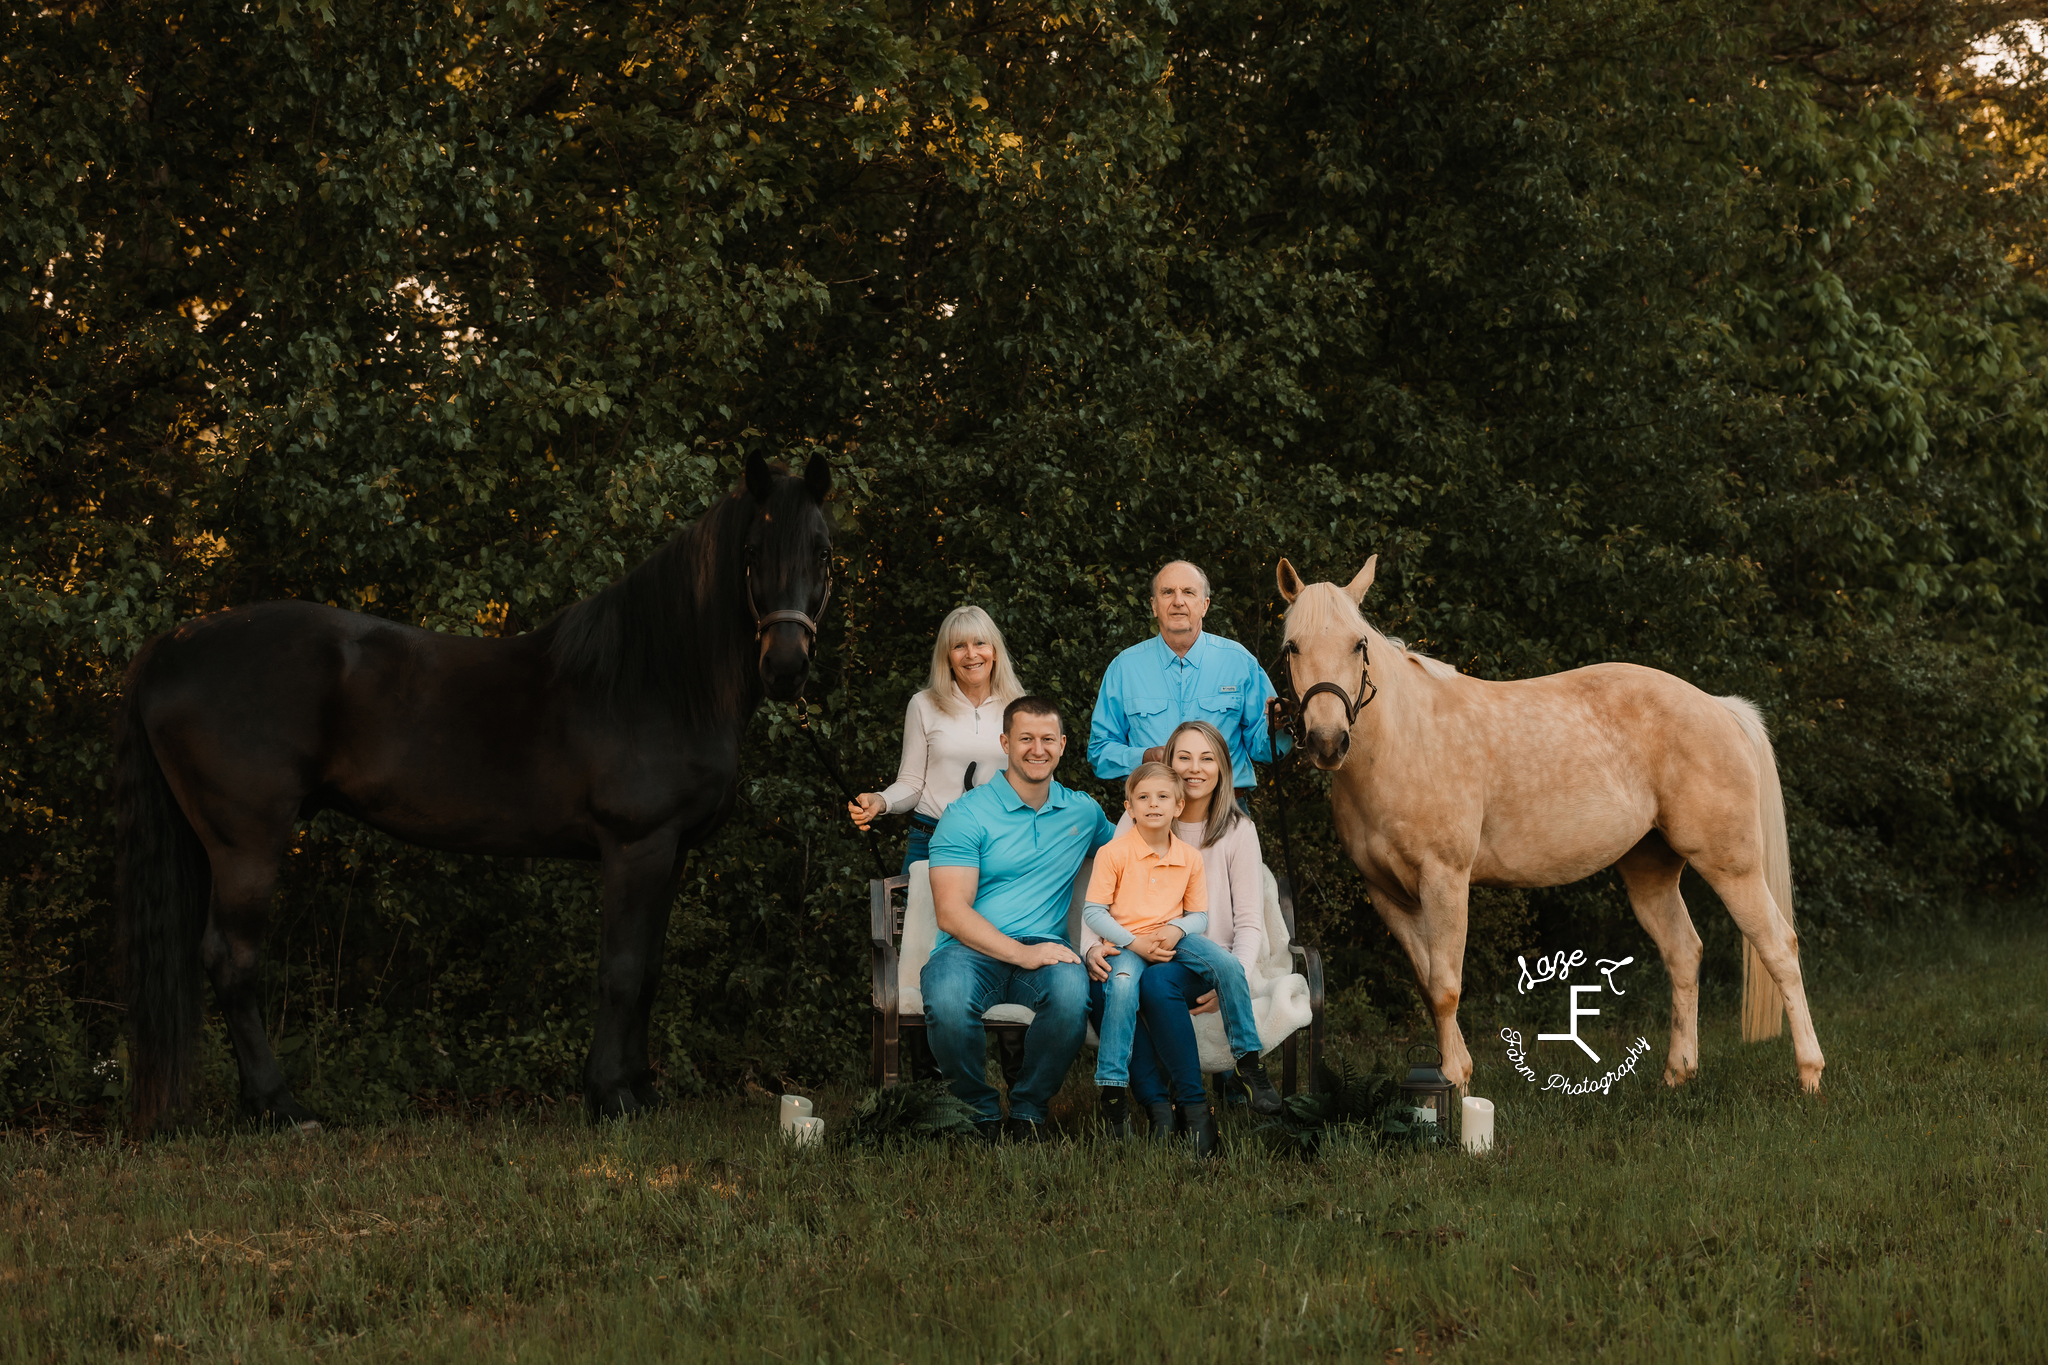 Entire family with 2 horses